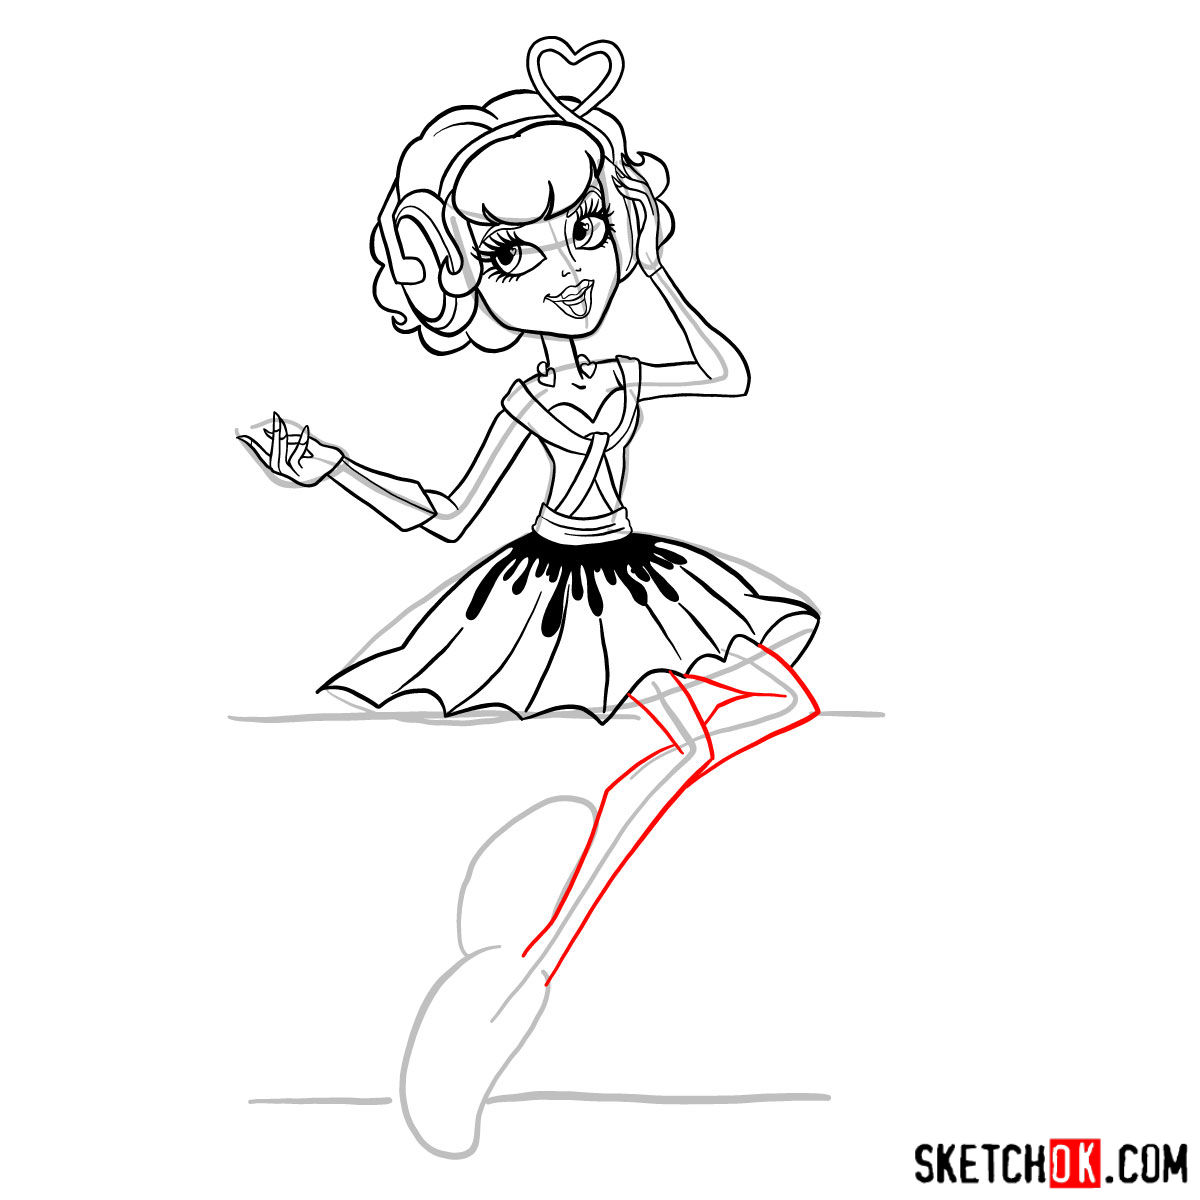 How to draw C.A. Cupid step by step - step 13